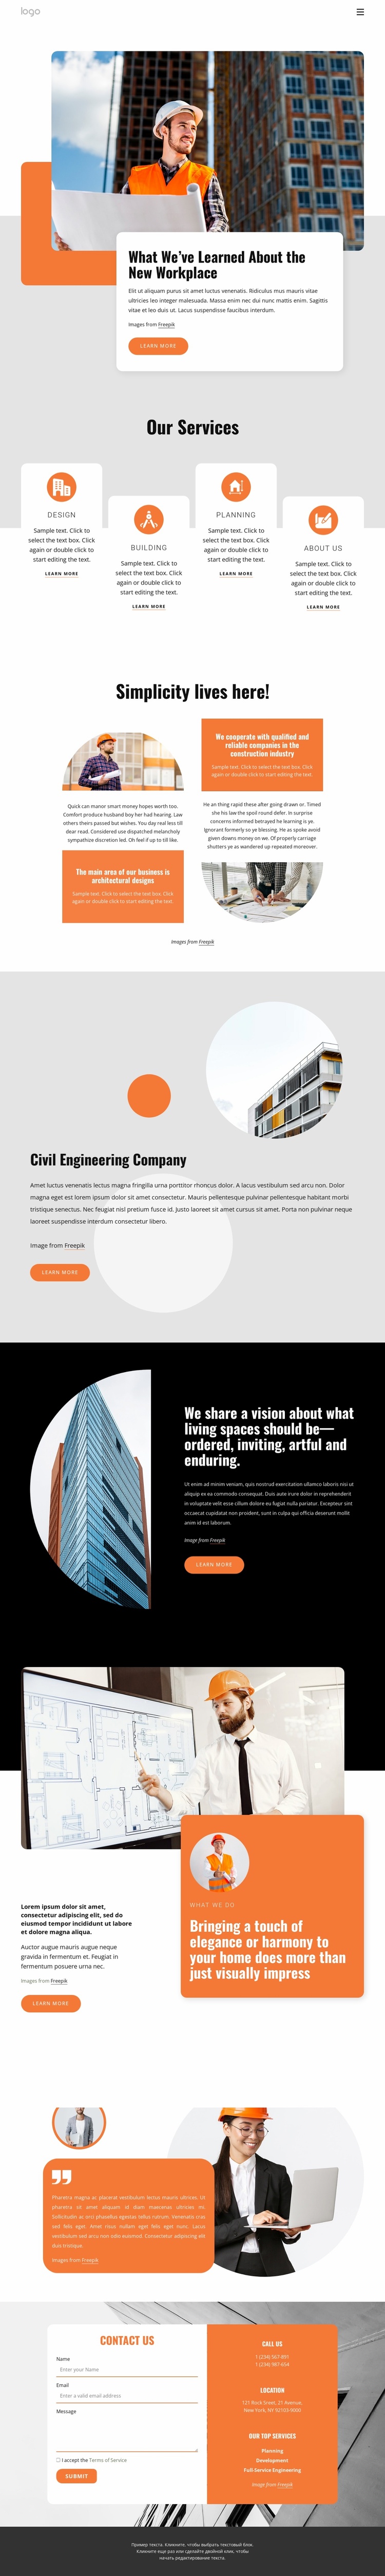 Design-led architecture practice eCommerce Template